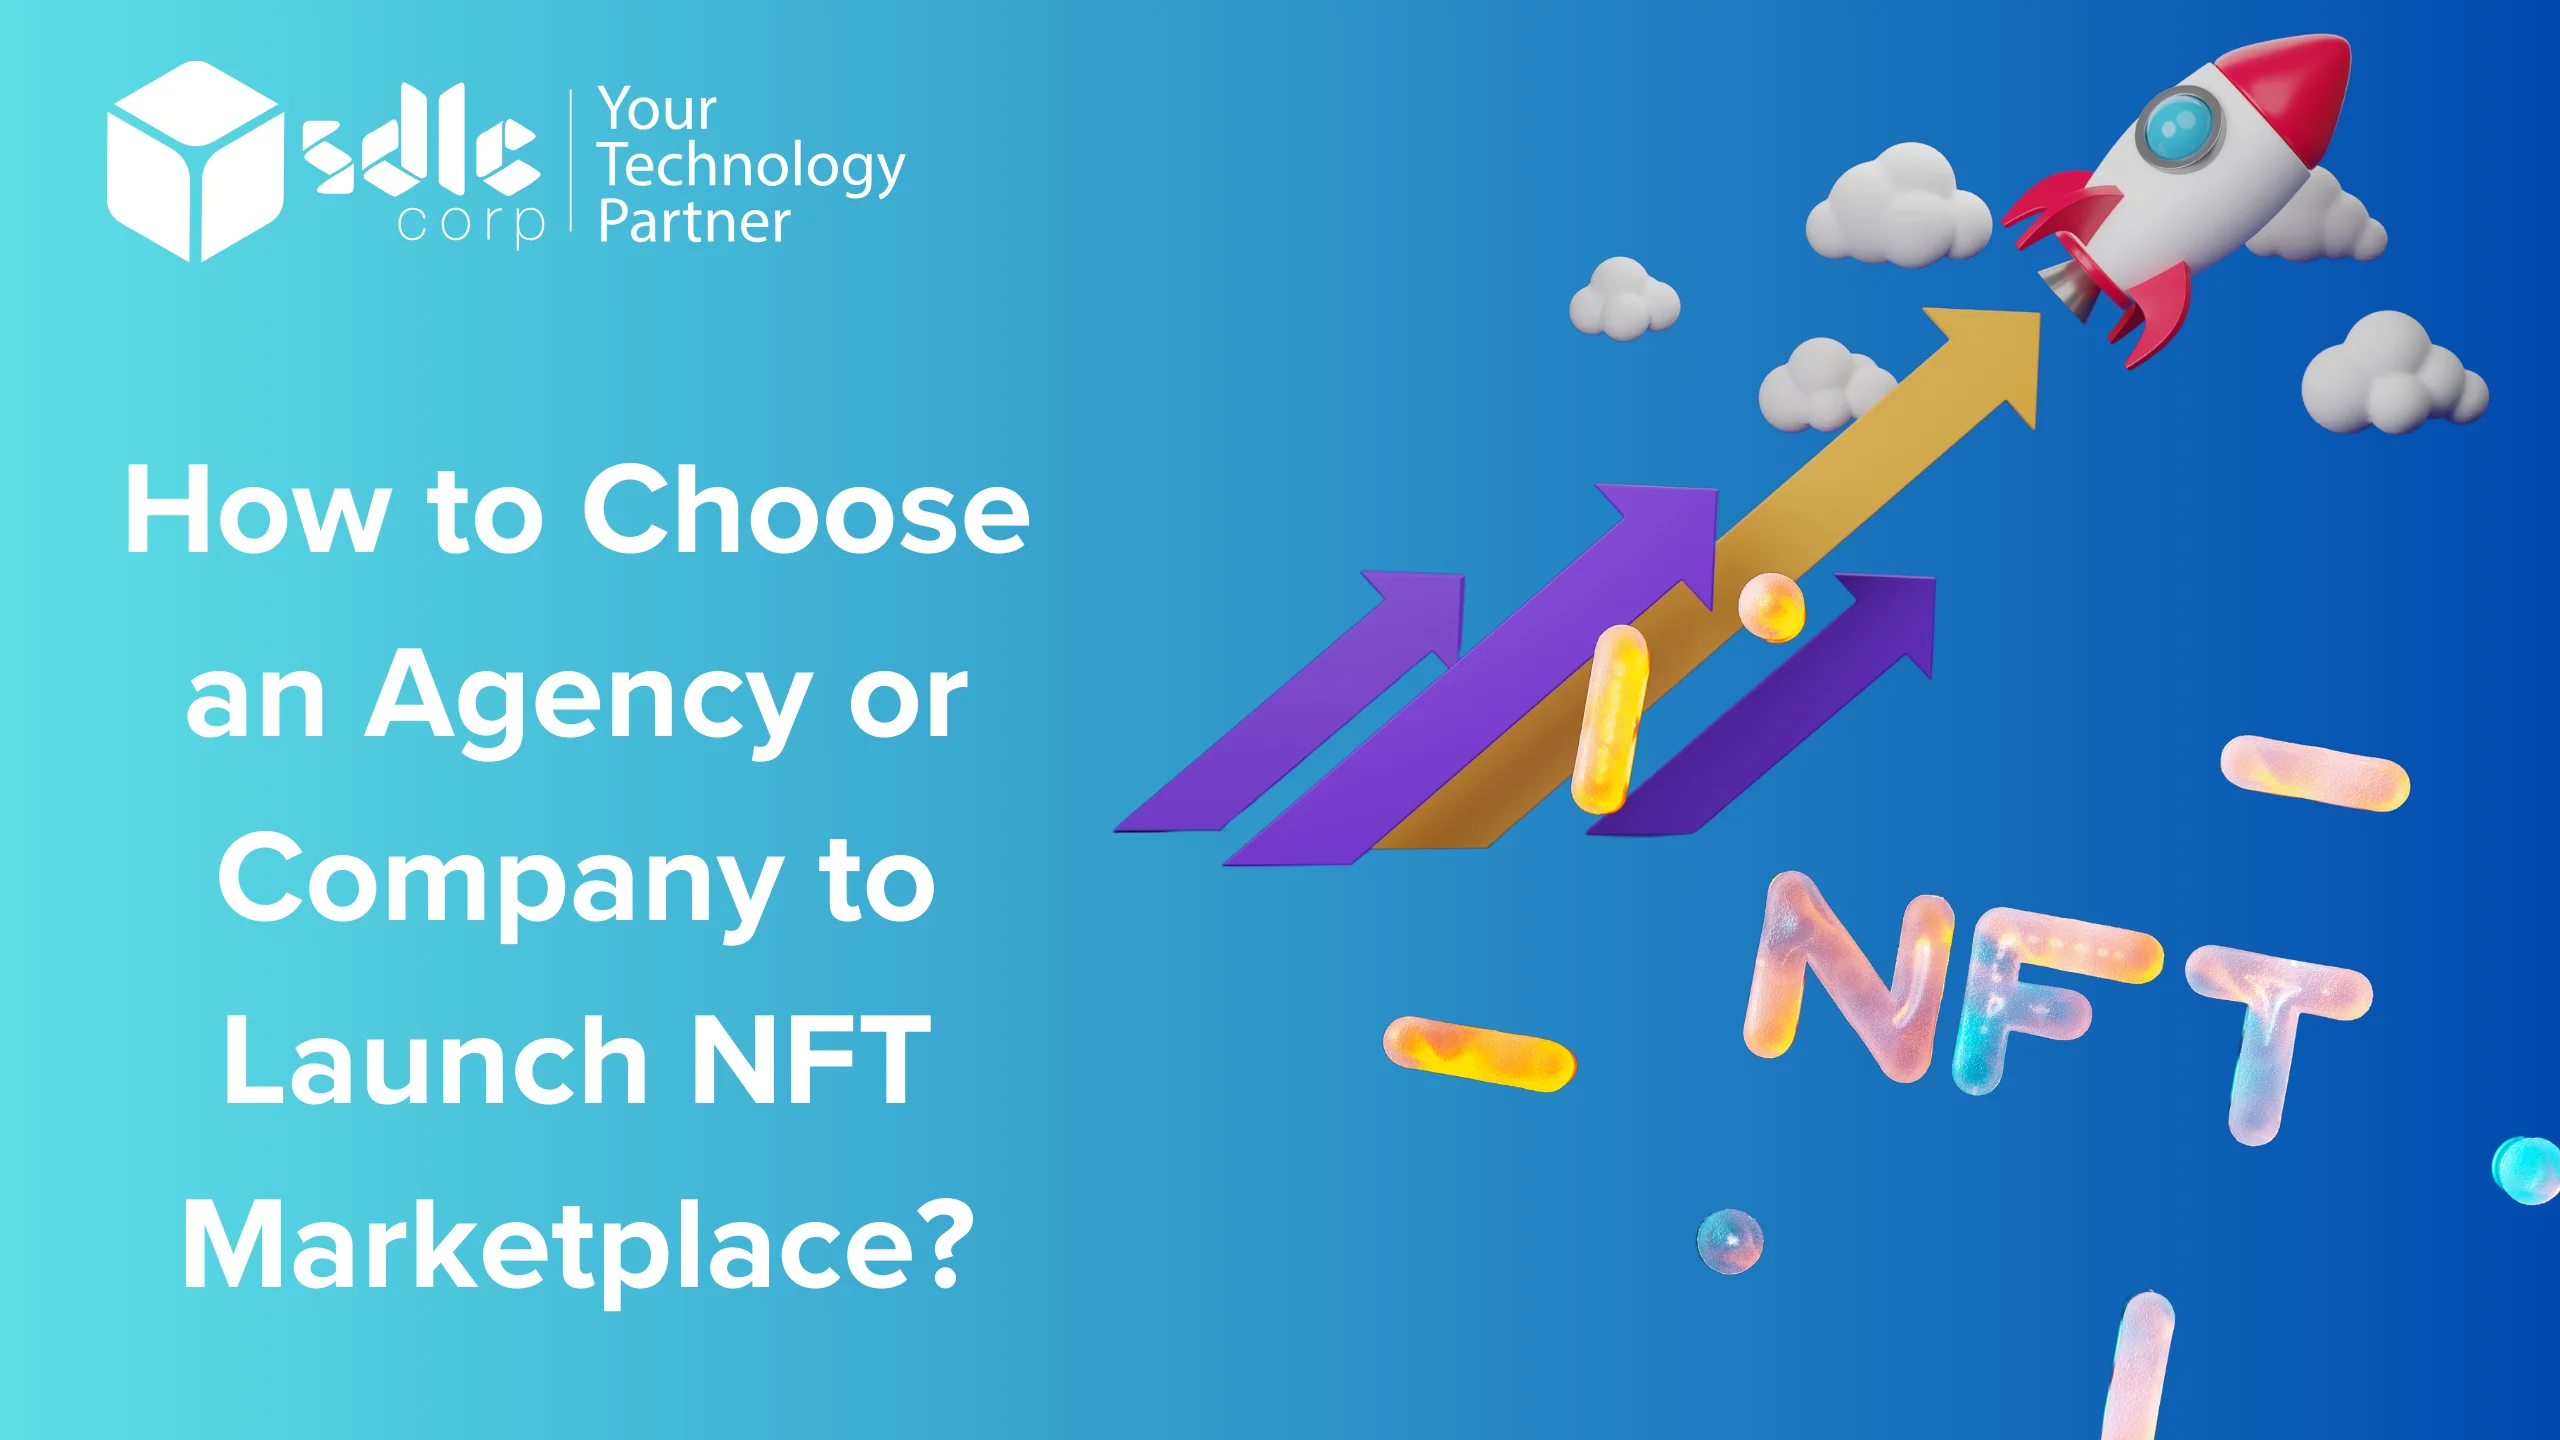 How-to-Choose-an-Agency-or-Company-to-Launch-NFT-Marketplace.webp